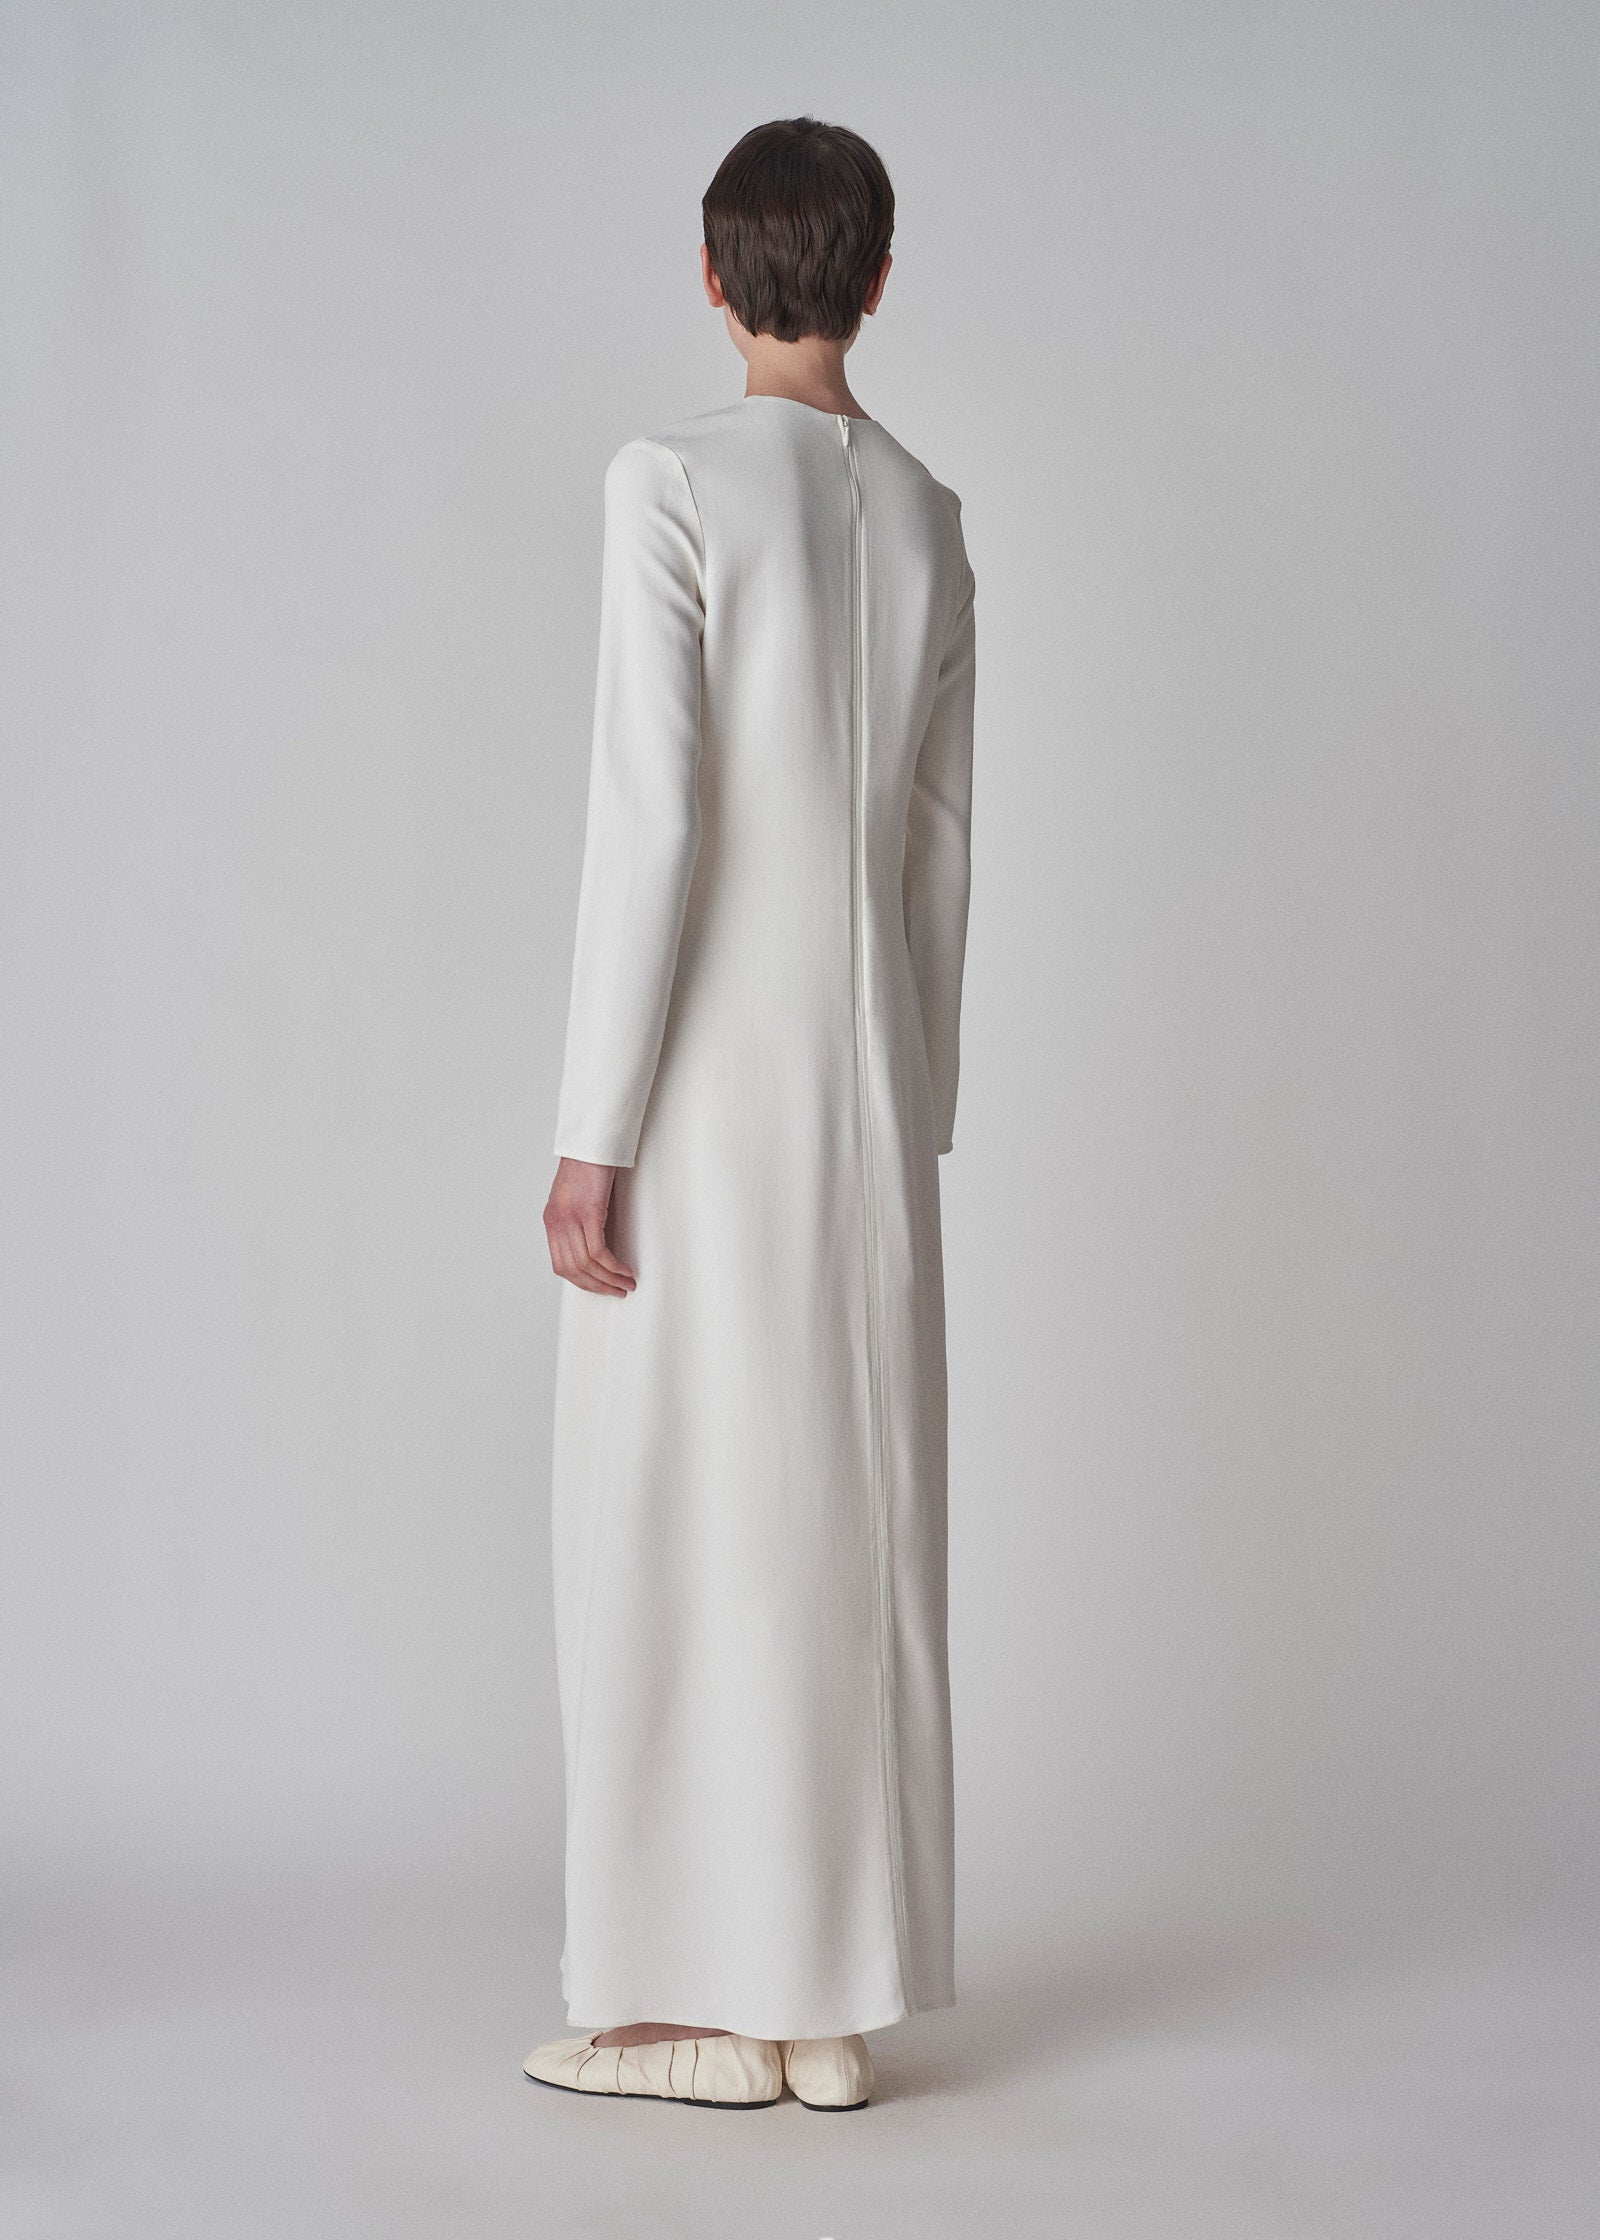 Long Sleeve Column Dress in Viscose Crepe - Ivory - CO Collections